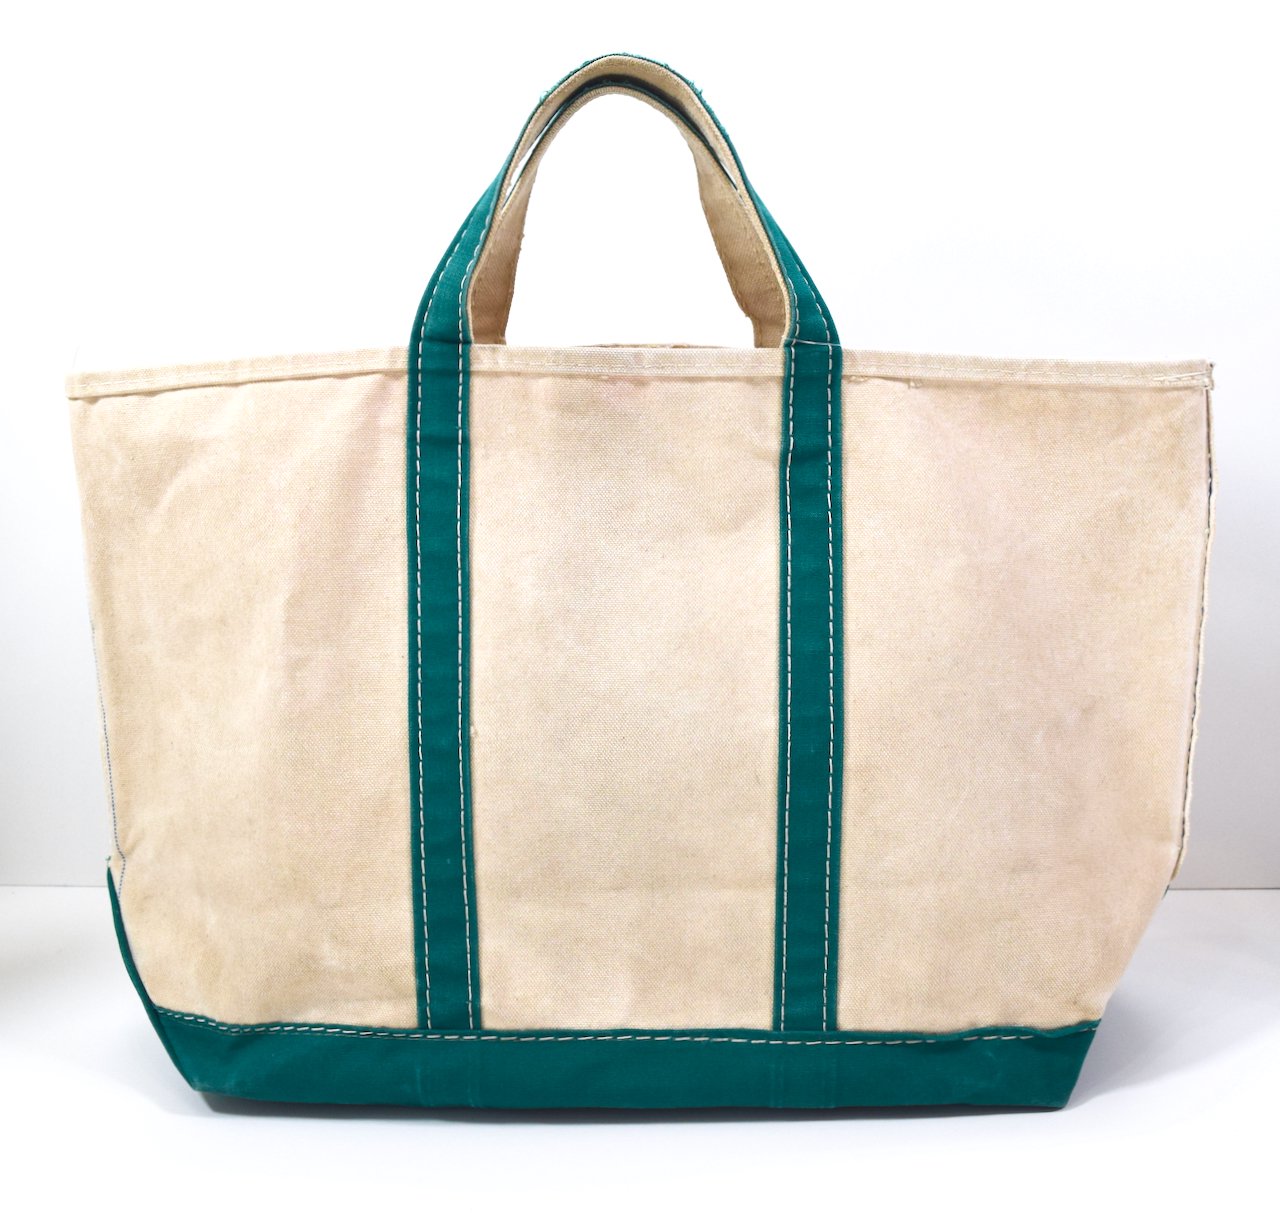 80s L.L.Bean Boat and tote Large size 二色タグ ヴィンテージトート 